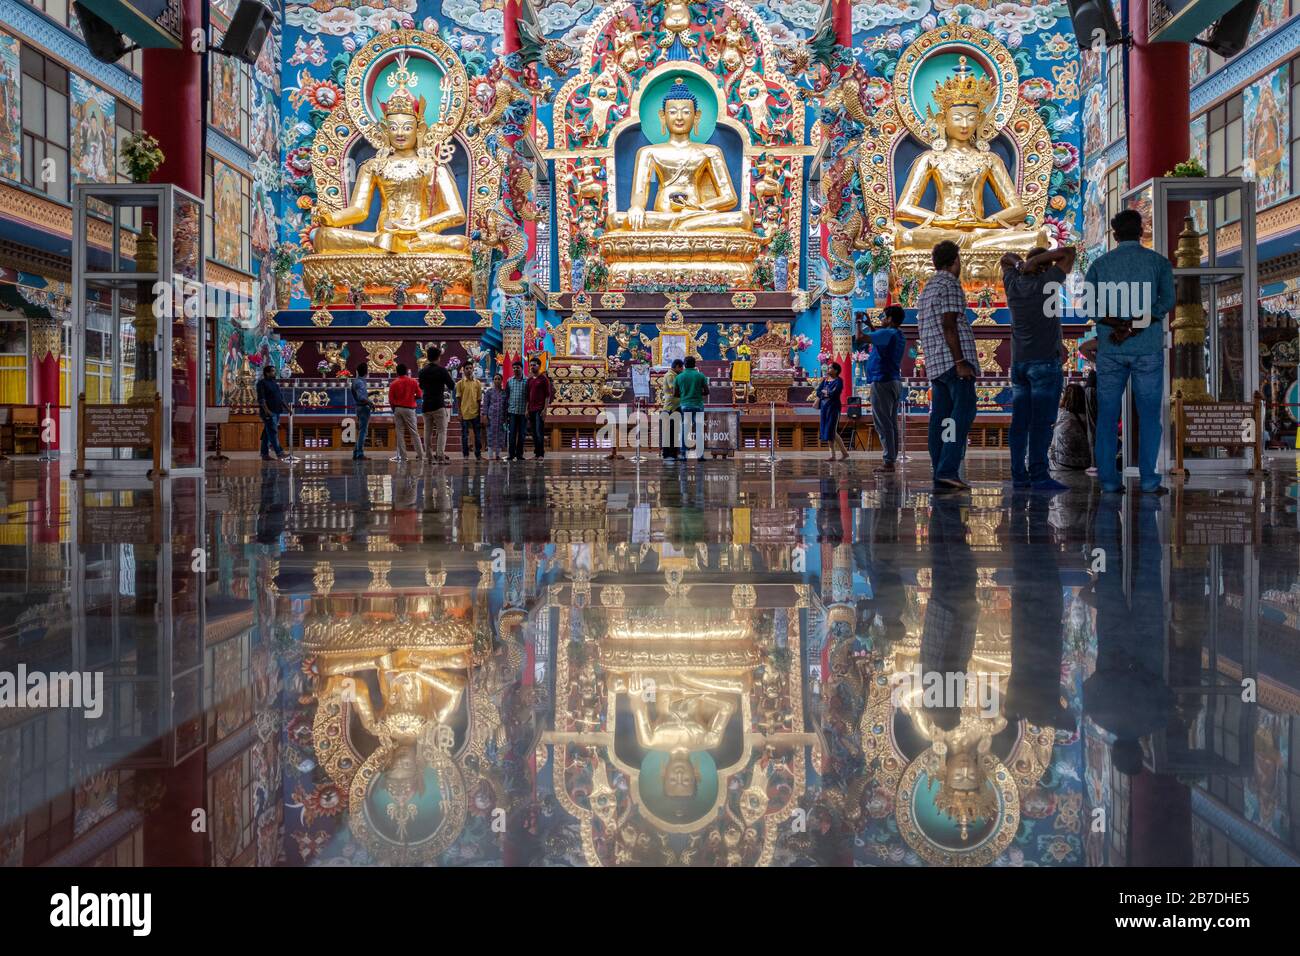 Bylakuppe, Karnataka, India - March 15, 2018: Visitors in the main temple of at the Namdroling Tibetan, Monastery with three buddhas reflecting on a s Stock Photo